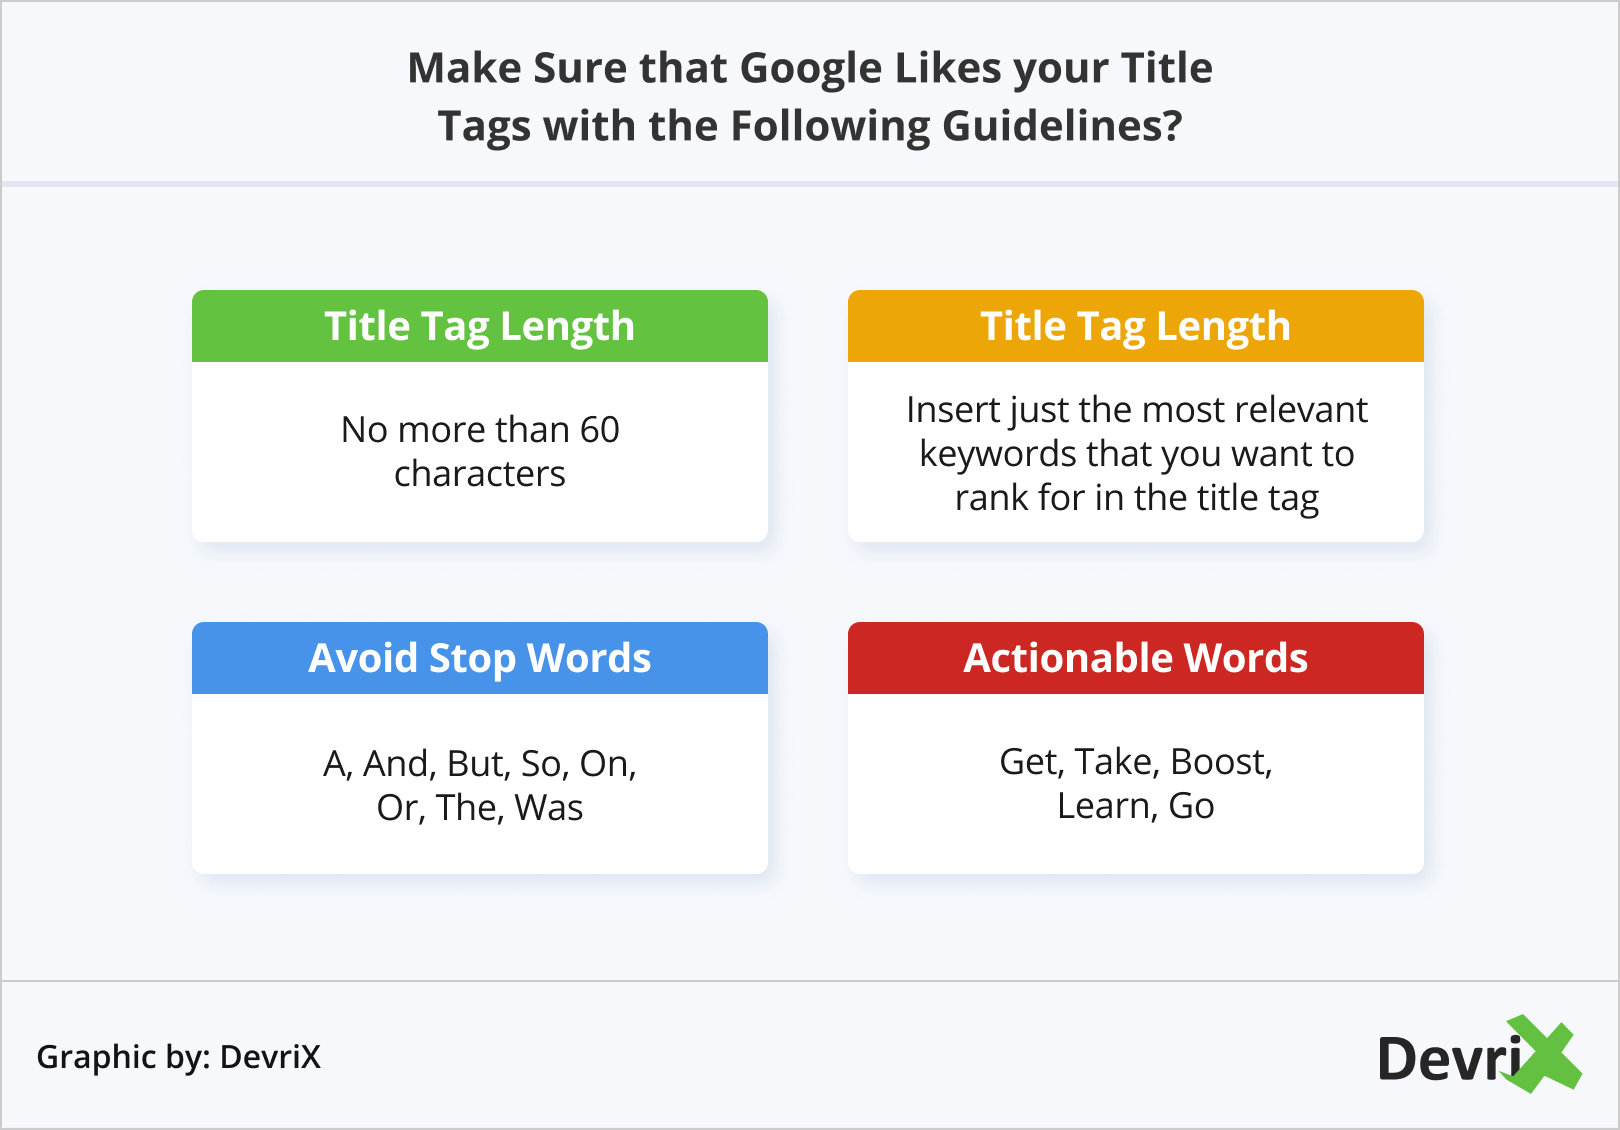 Make Sure that Google Likes your Title Tags with the Following Guidelines